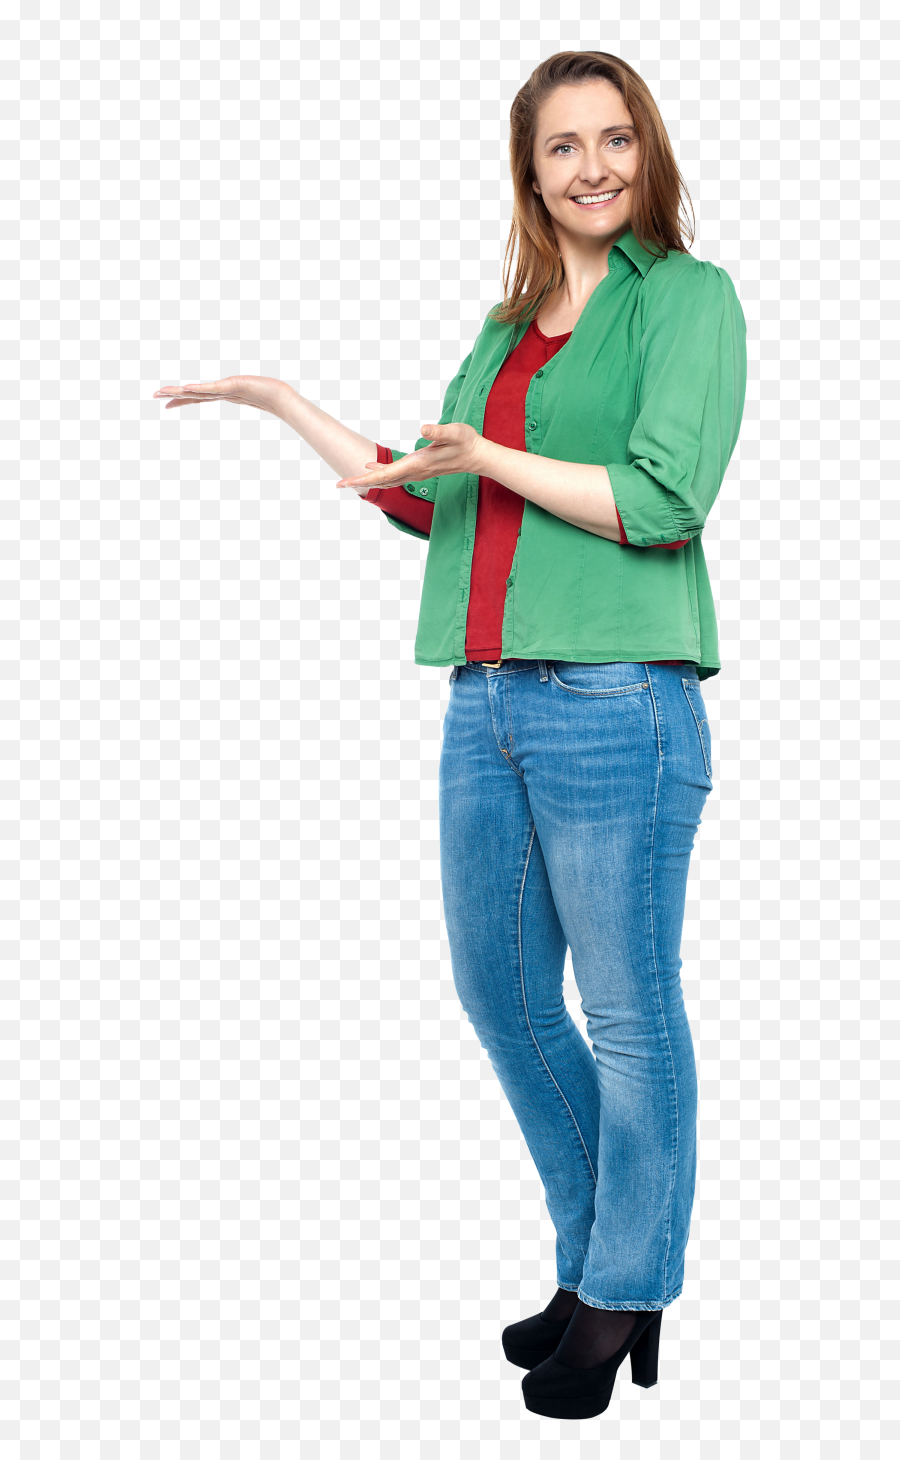 Women Pointing Left Png Image - Purepng Free Transparent Portable Network Graphics,People Pointing Png